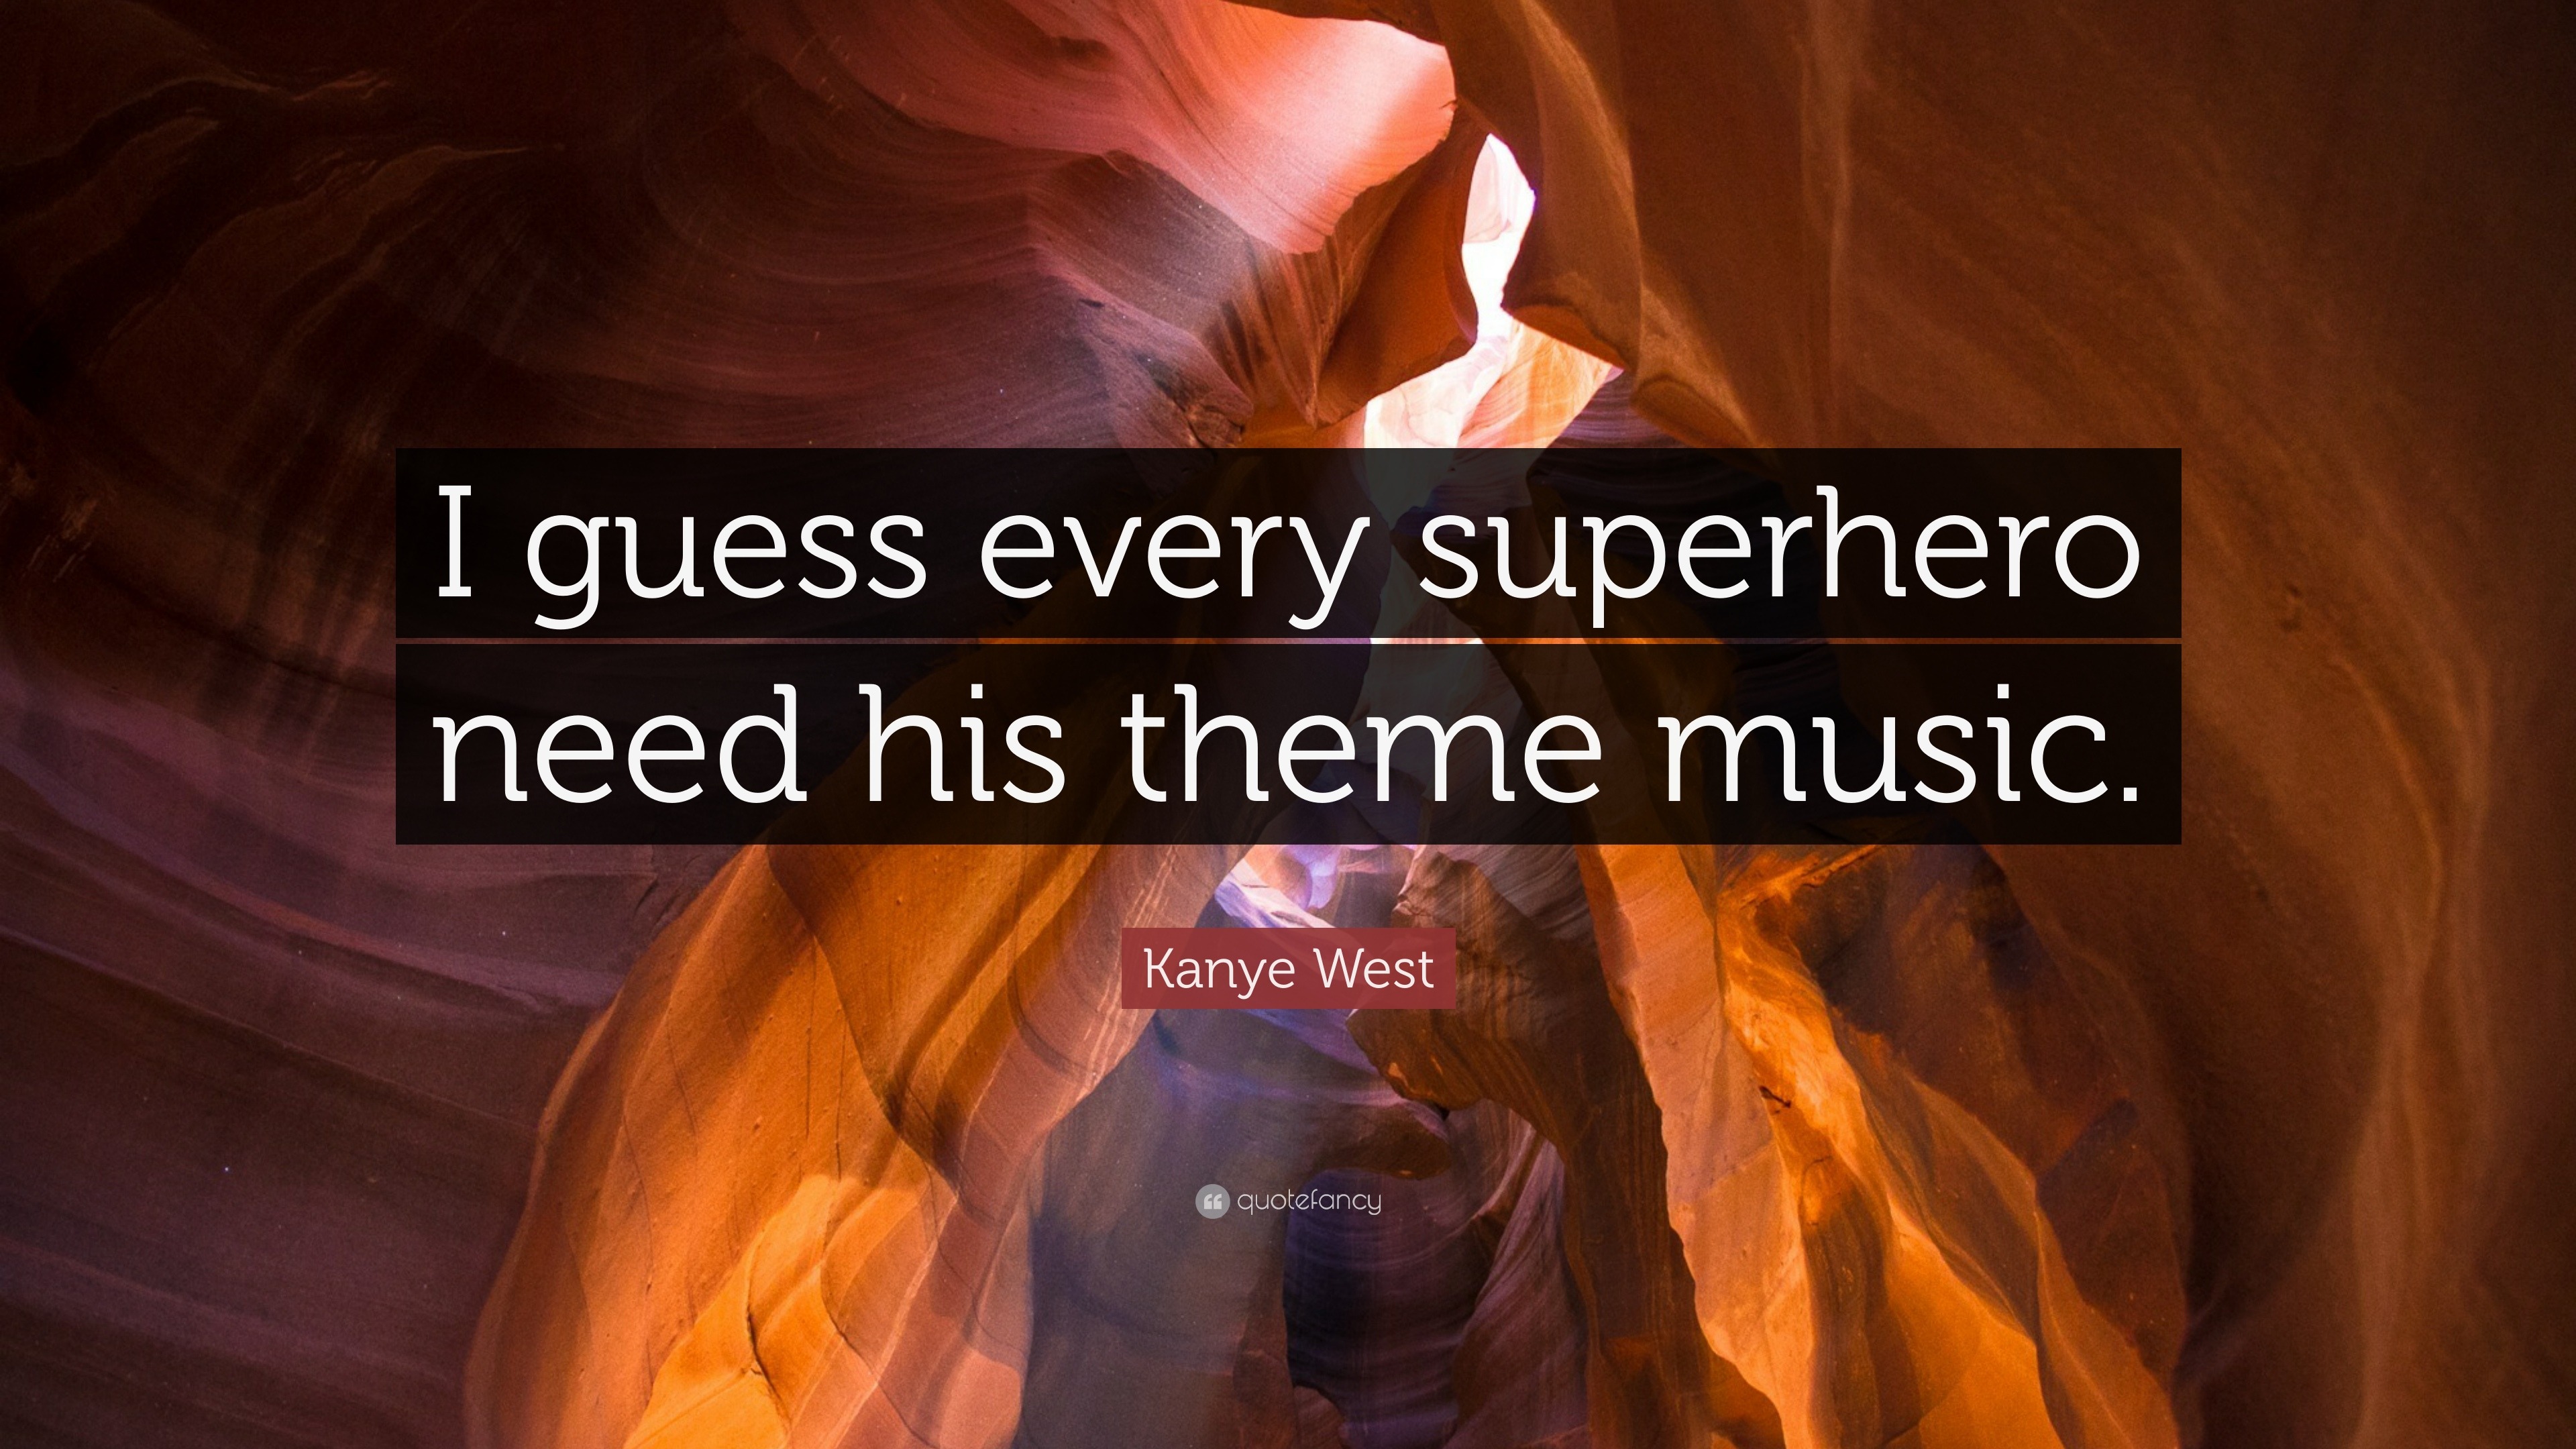 Superheroes #lyrics by #theScript  Music quotes, Quotes, Song quotes